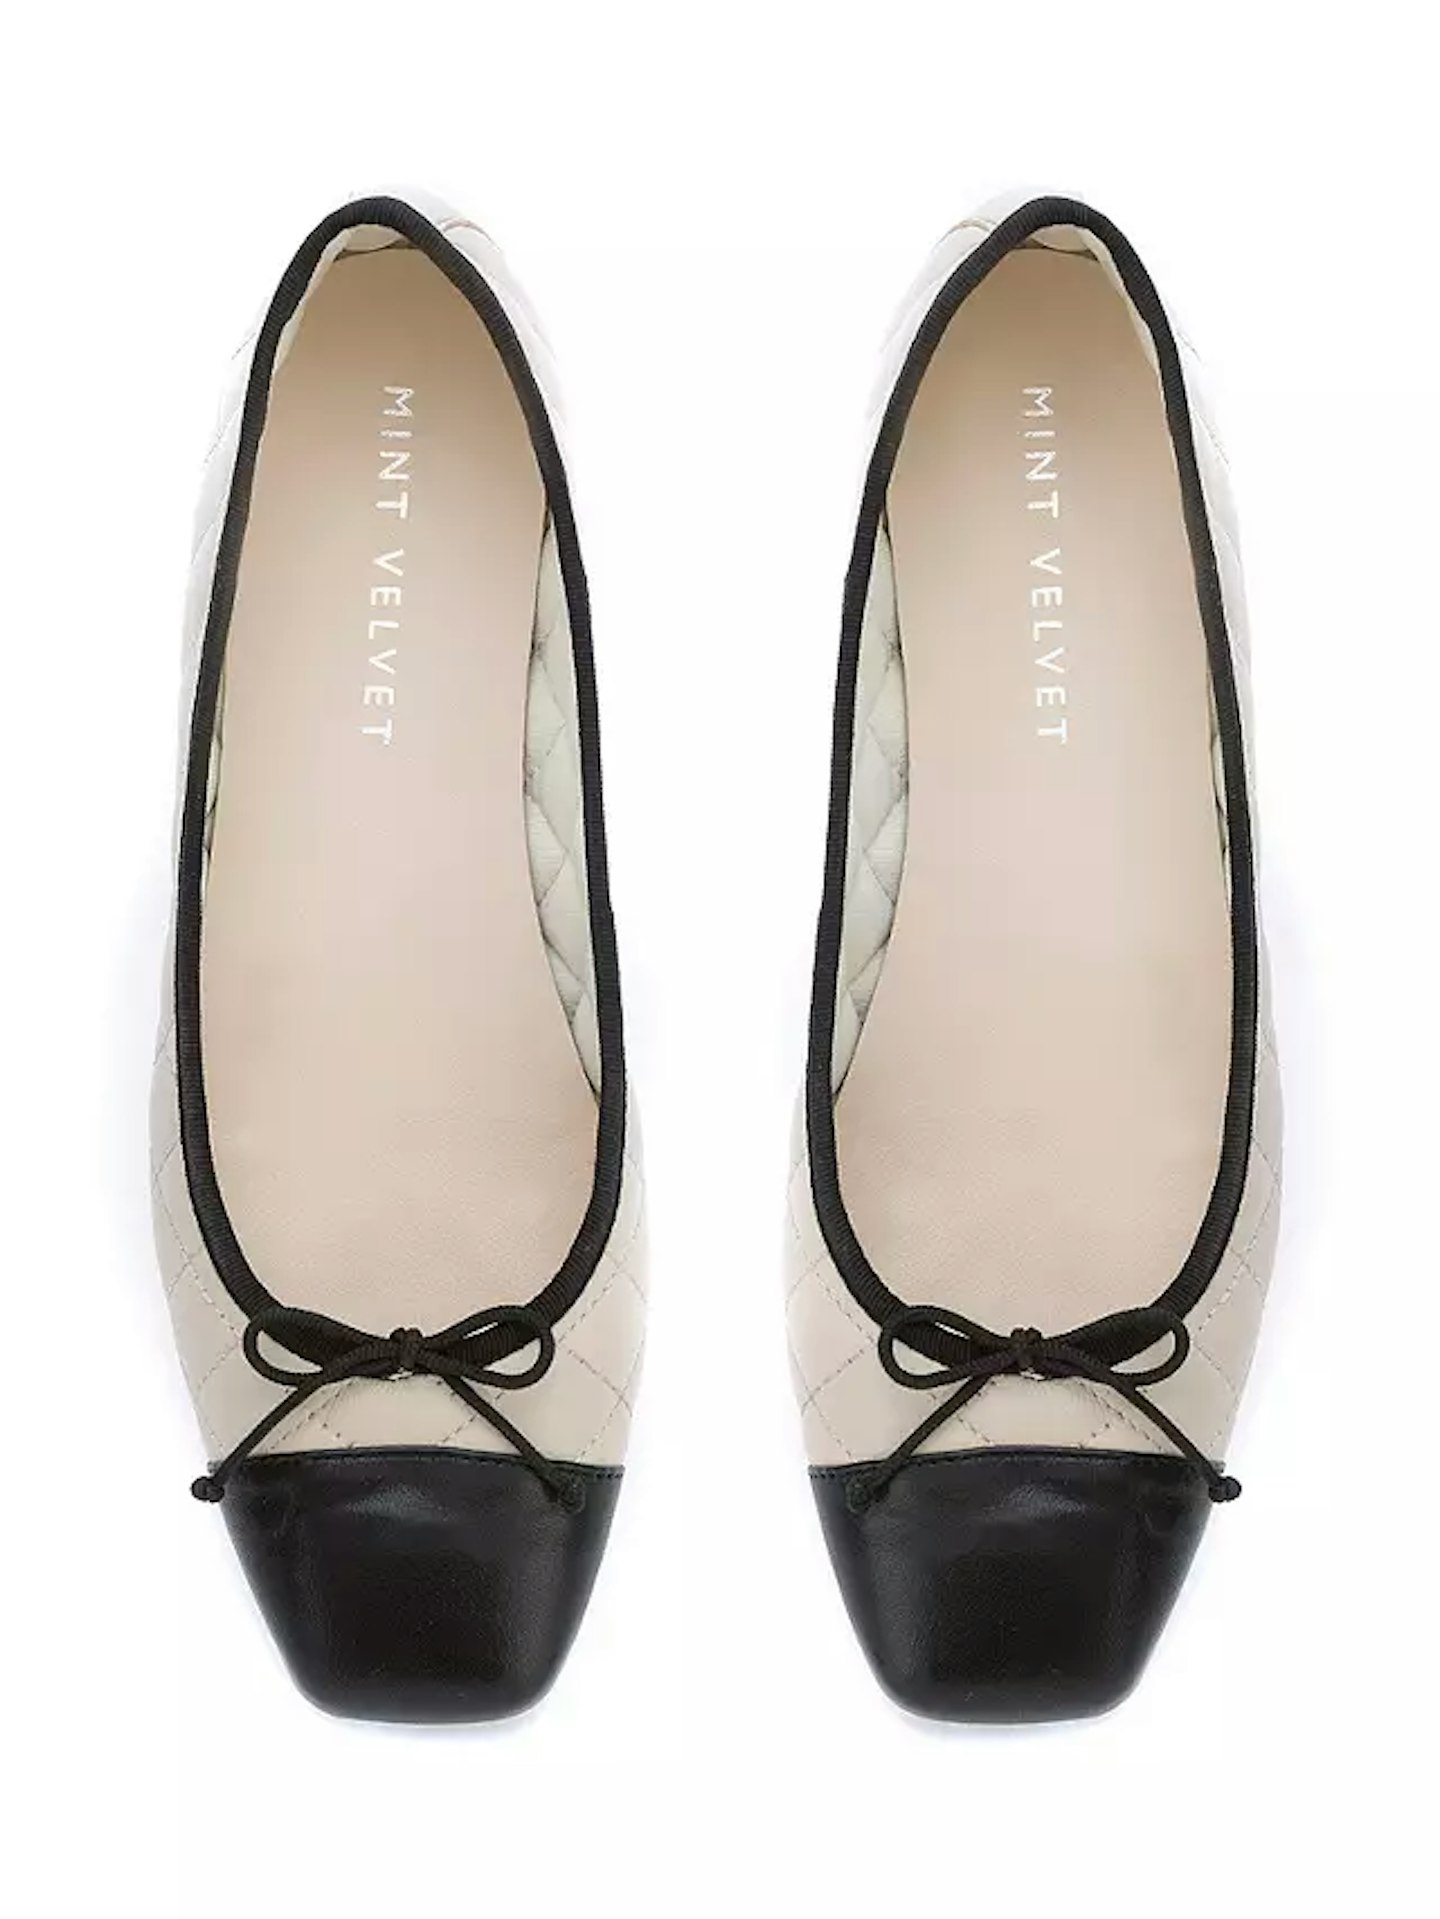 Shoppers rush to buy £36 Chanel ballet flats dupe that's £800